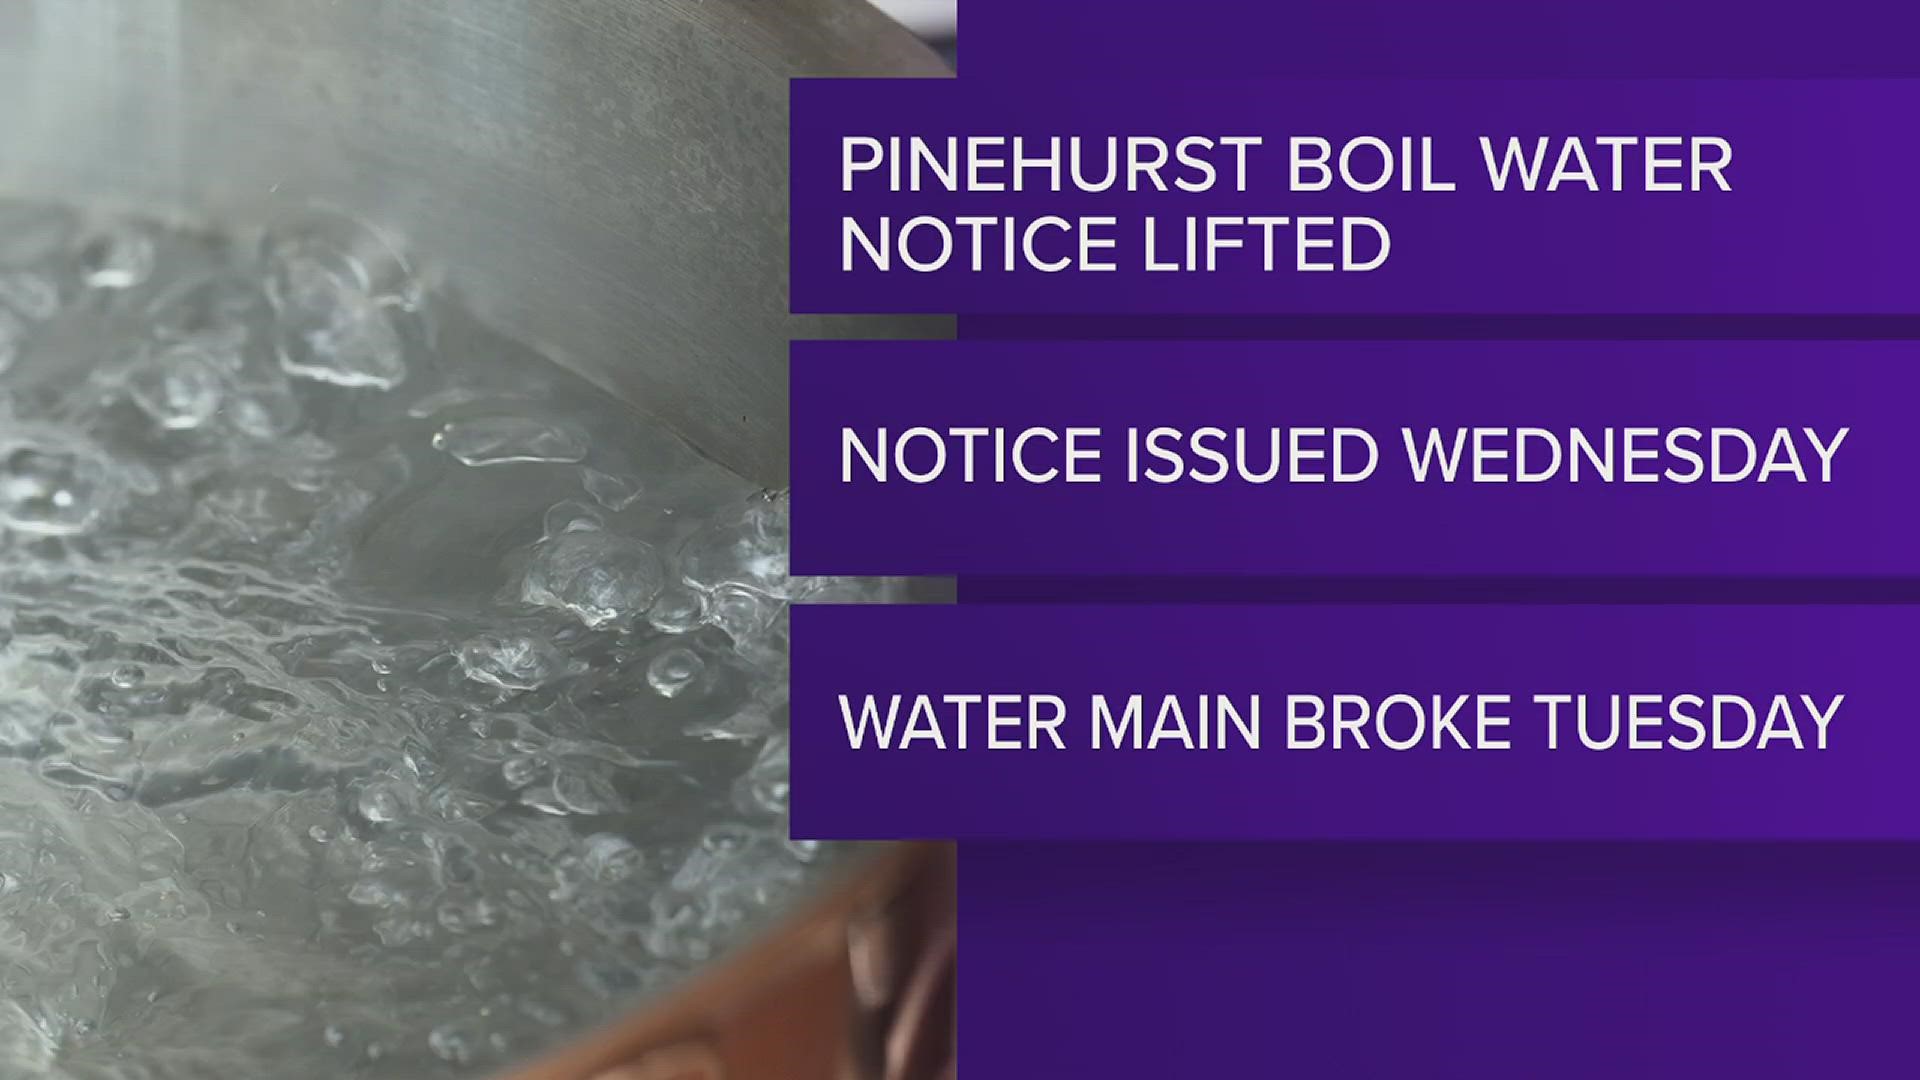 The boil water notice for residents in the City of Pinehurst has been lifted following a water main break Tuesday night.